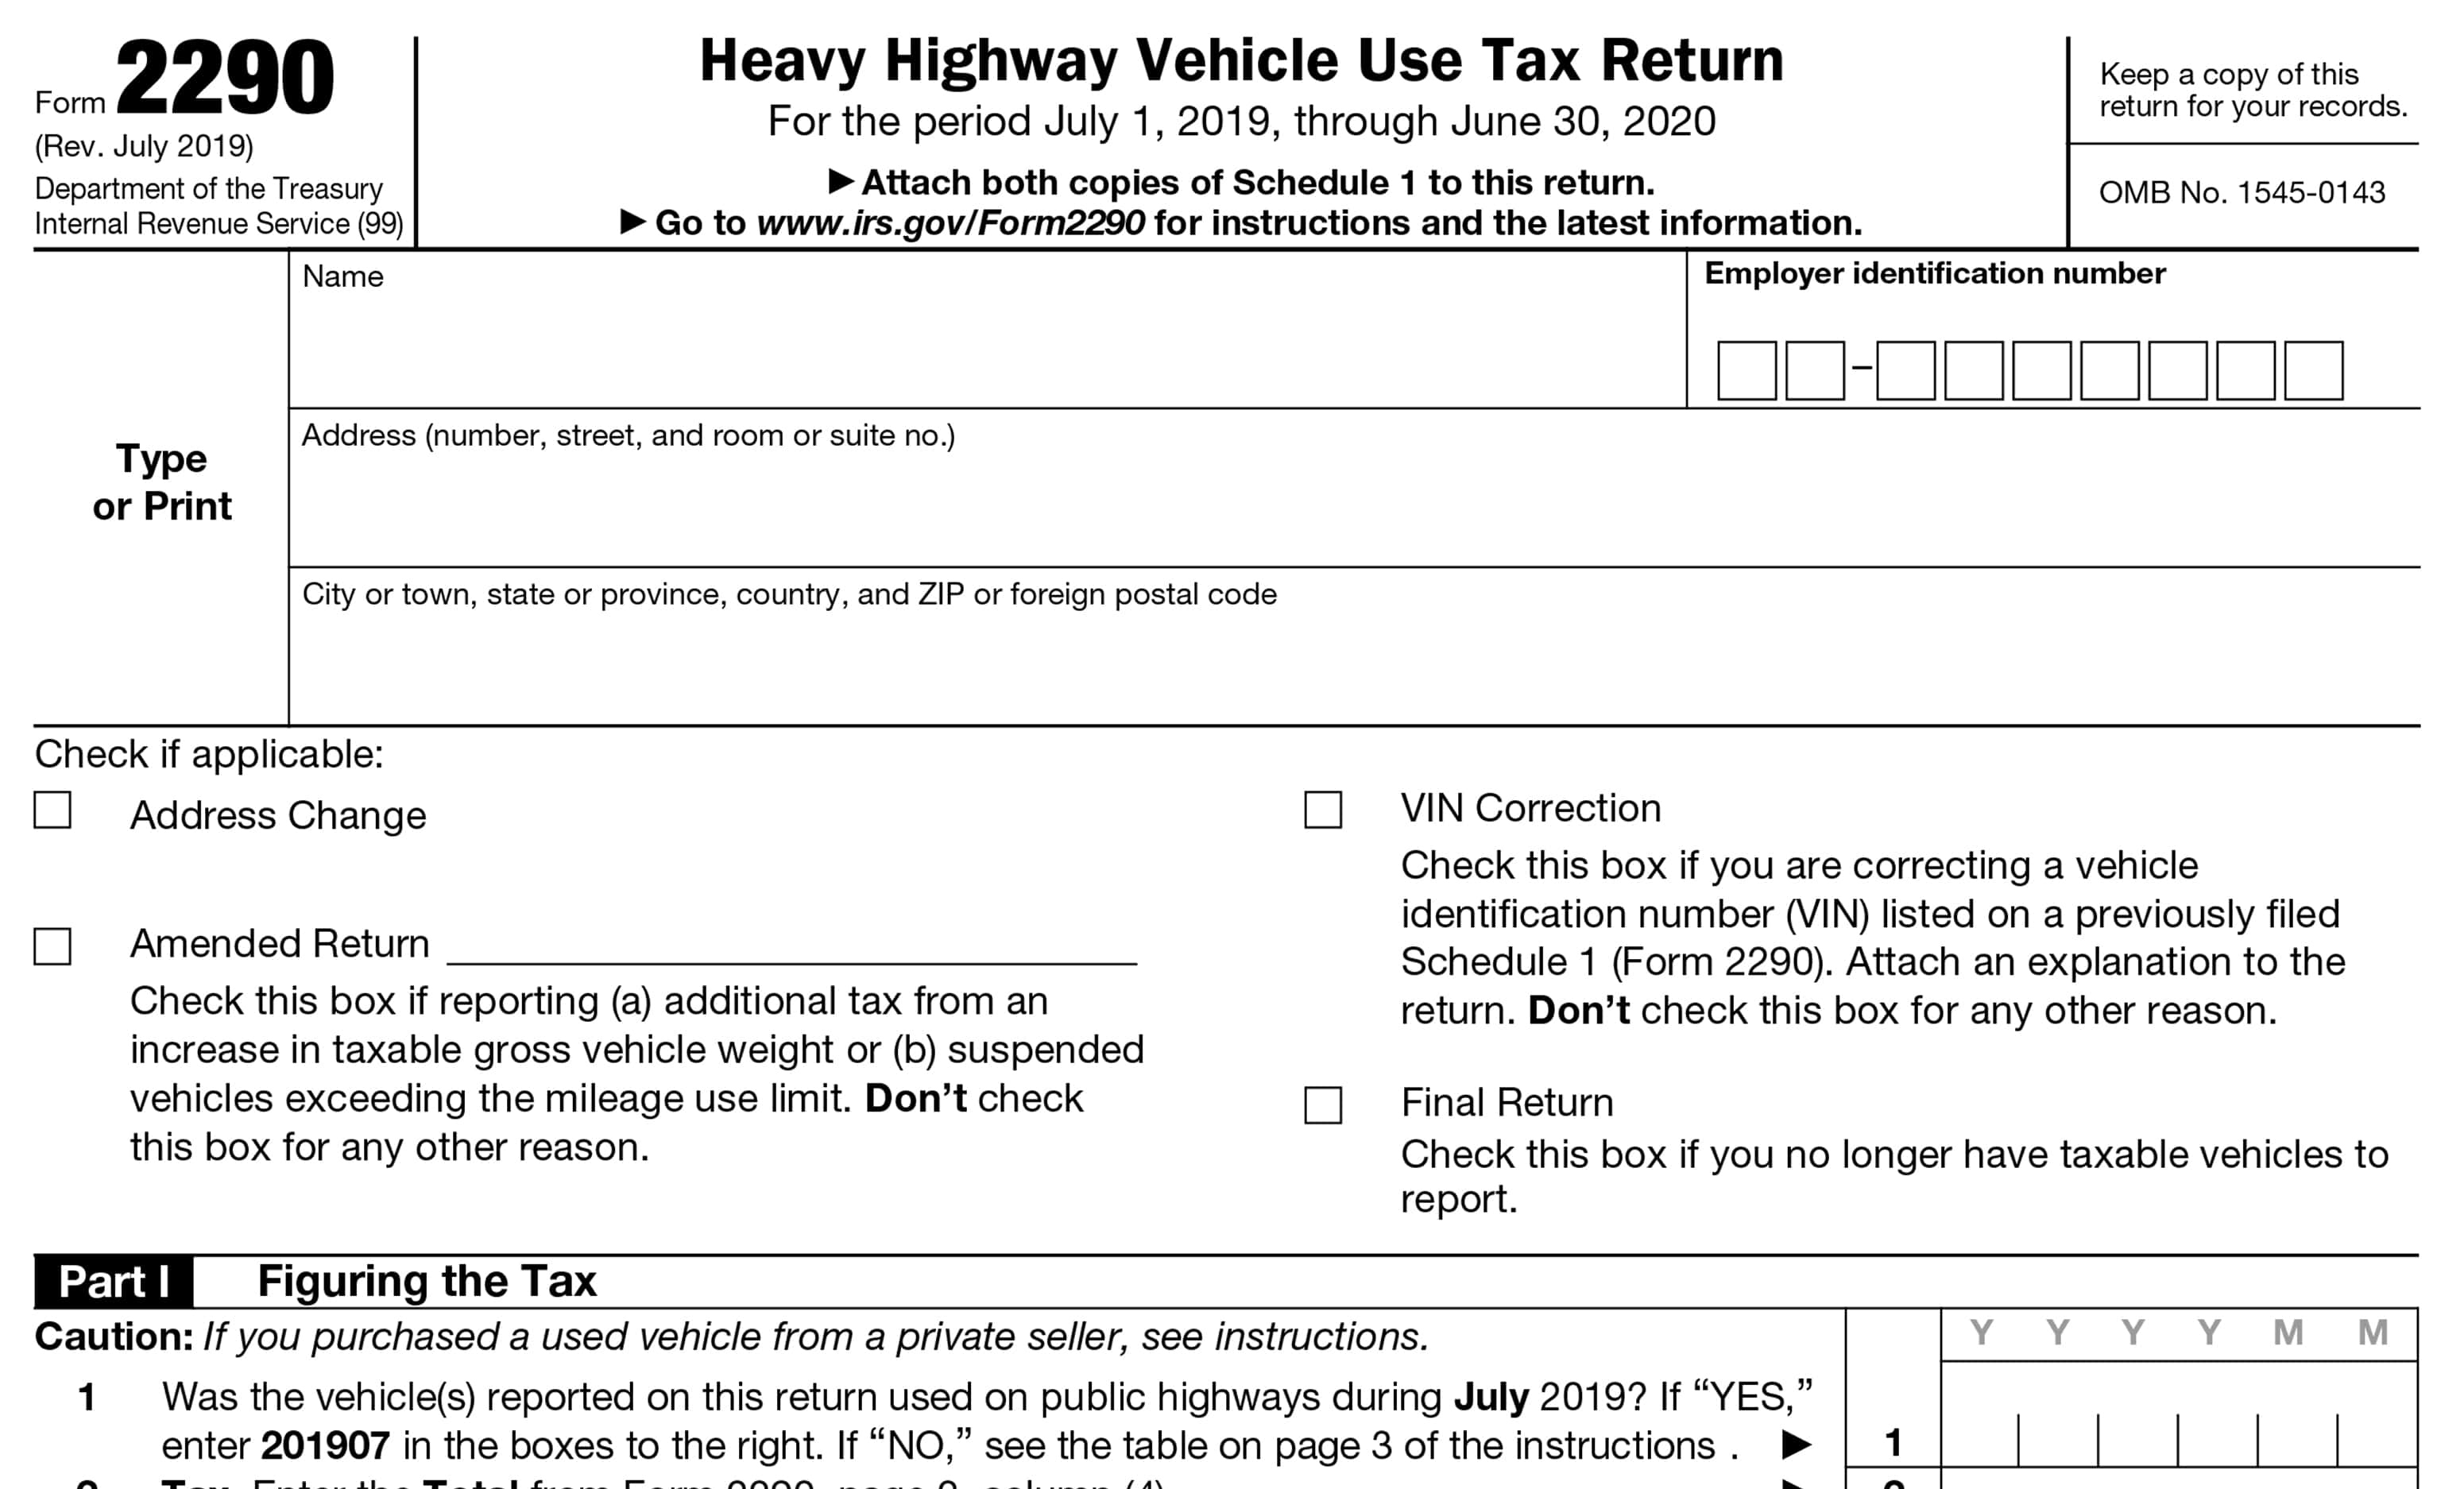 IRS Form 2290 Instructions How to Fill HVUT 2290 Form